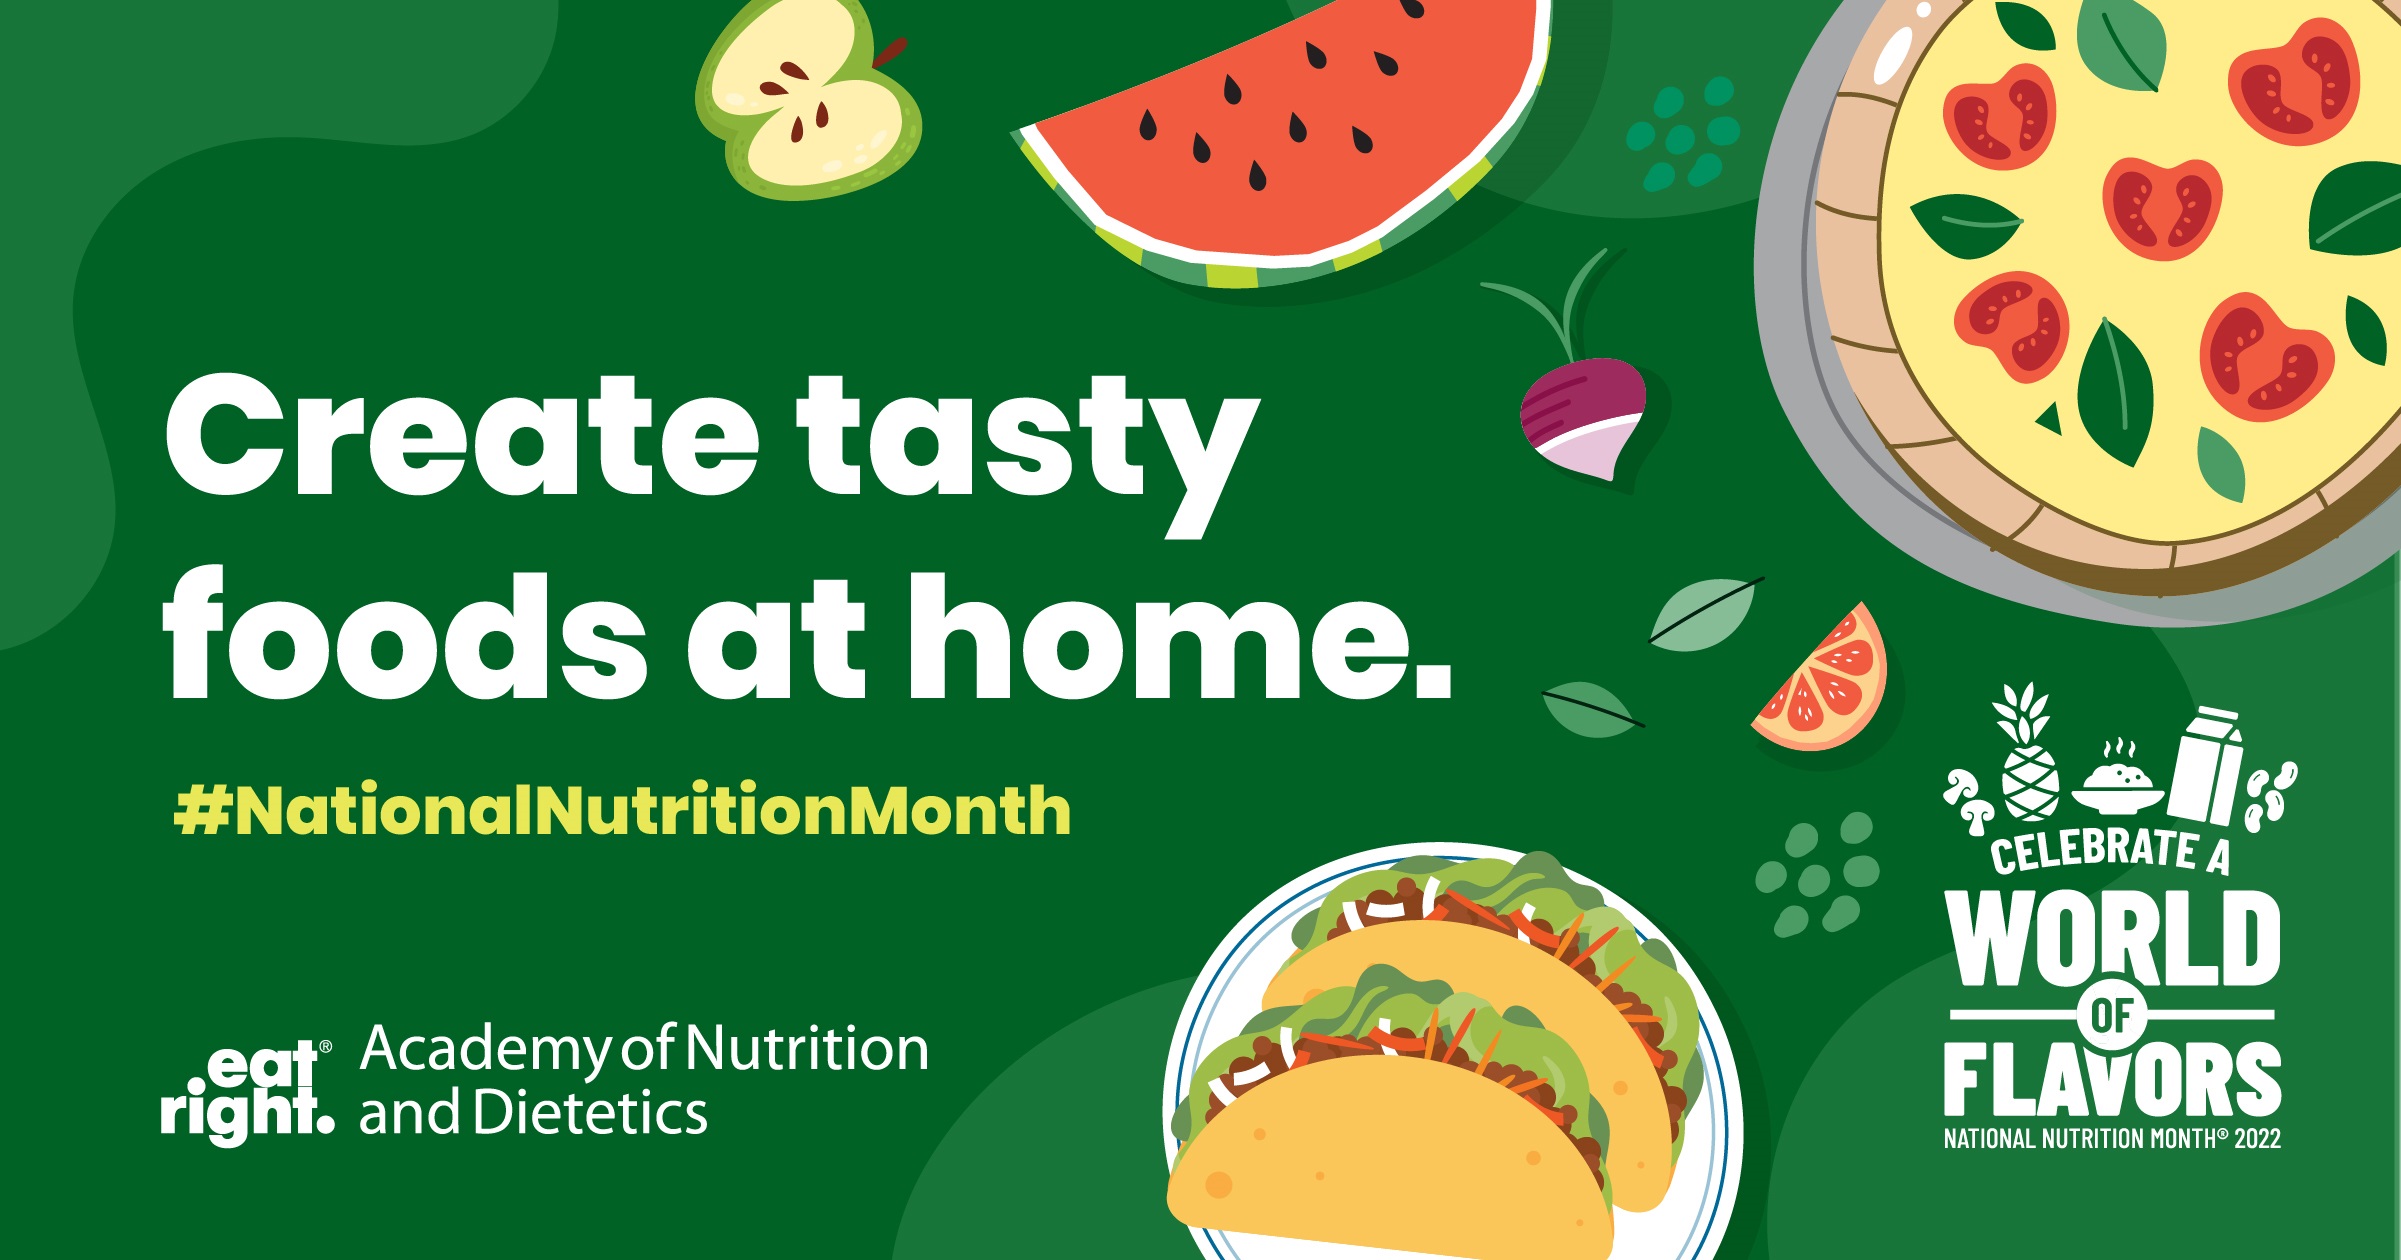 National Nutrition Month Graphic: Create tasty foods at home